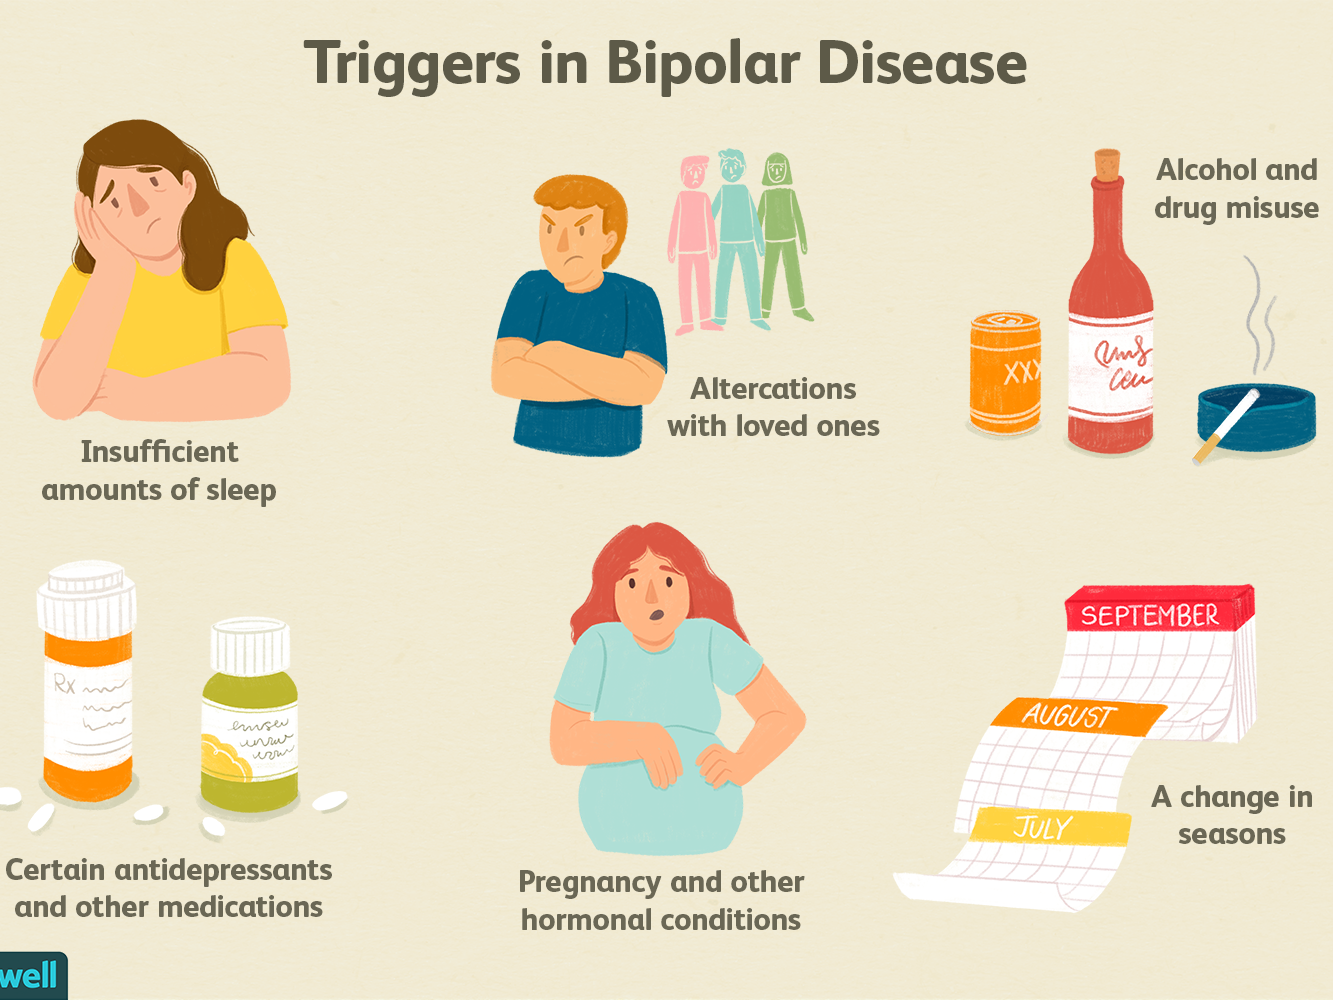 What should we know about Bipolar Disorder?